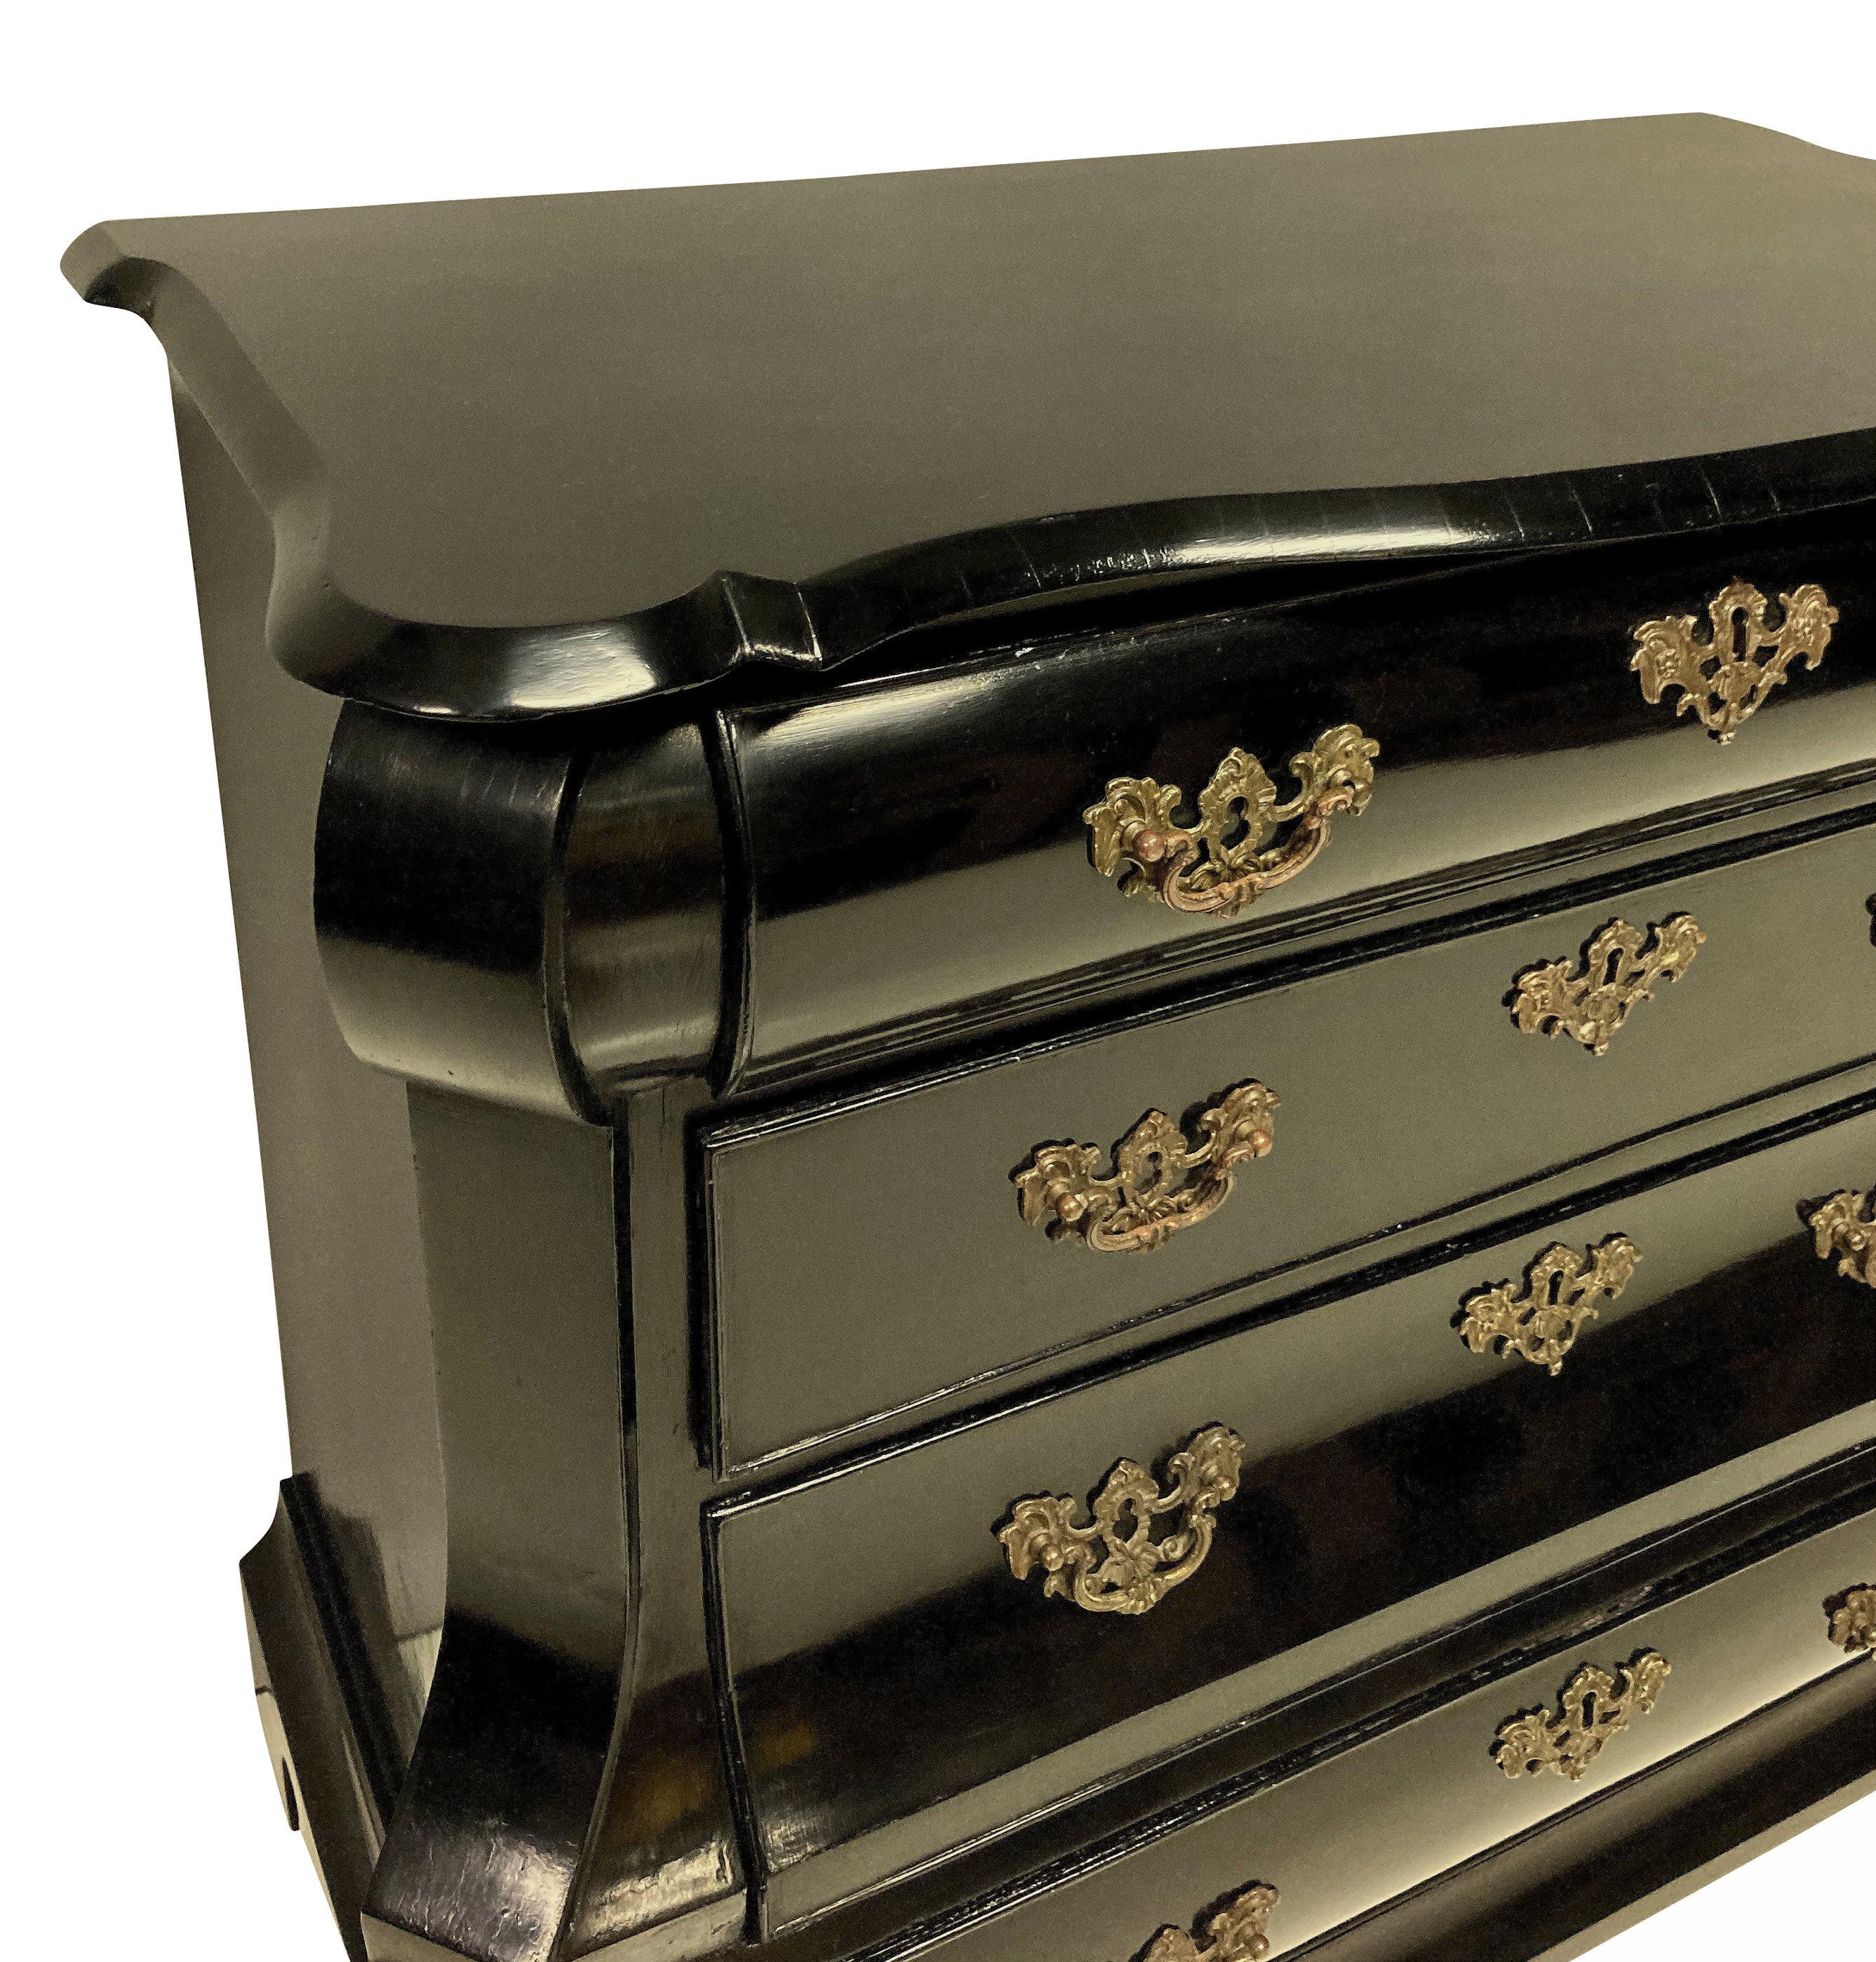 An early XIX century Dutch chest of drawers in ebonised walnut, with the original handles on four drawers and resting on paw feet.